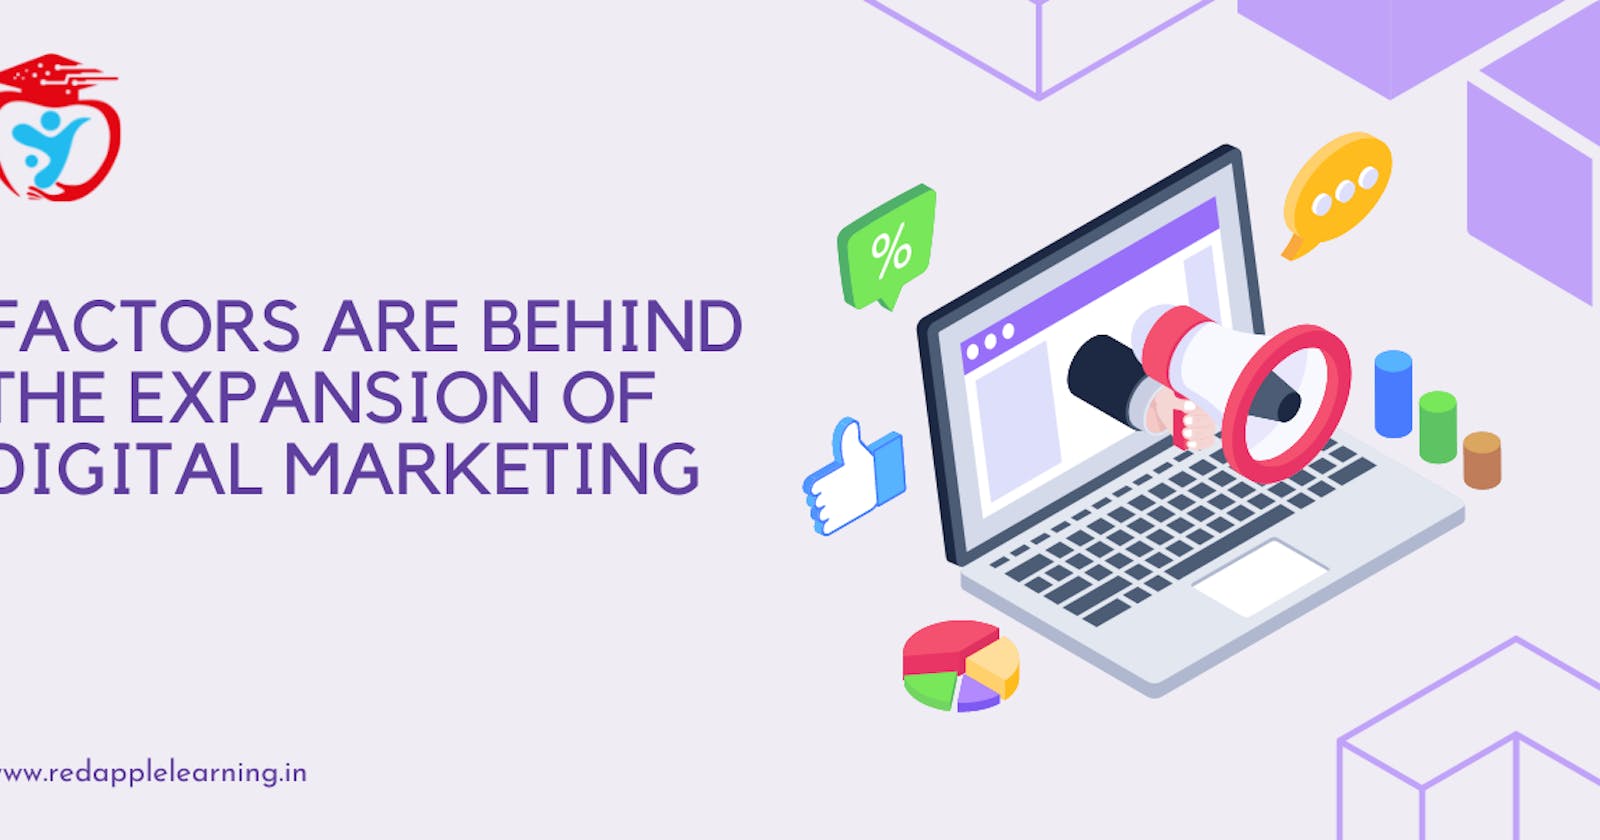 What Factors are Behind the Expansion of Digital Marketing?